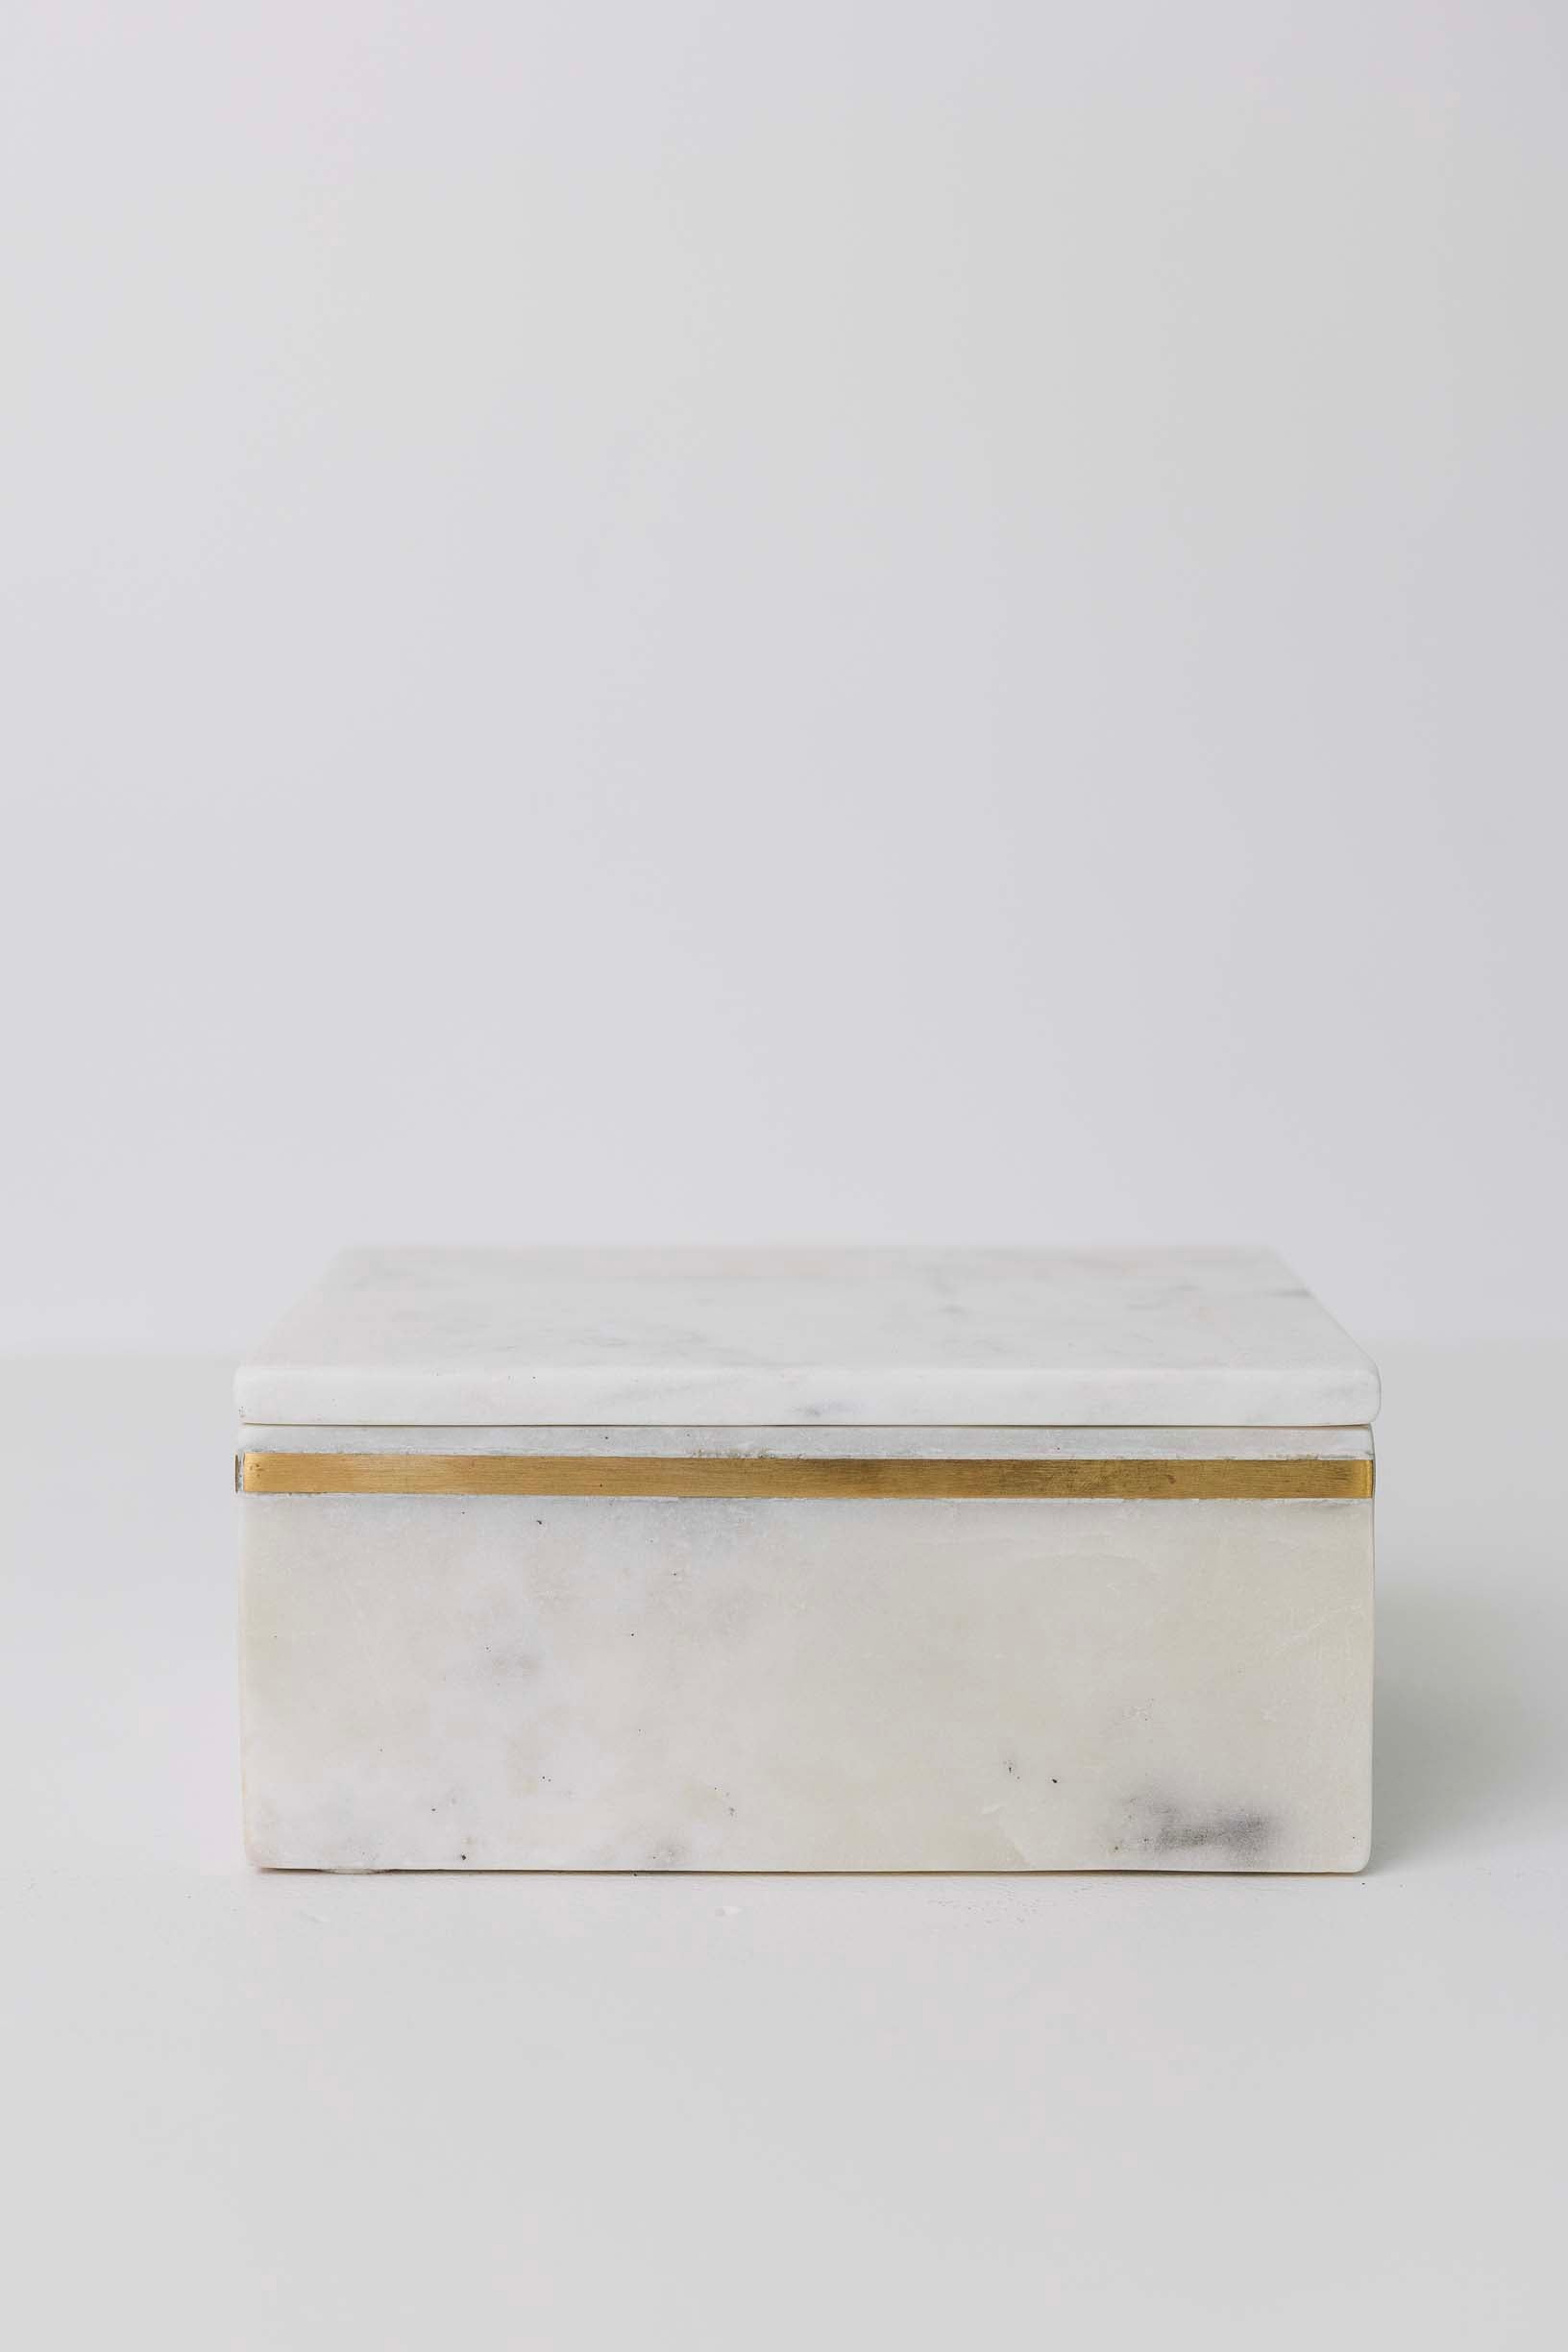 The Essentials Marble Box Sizes